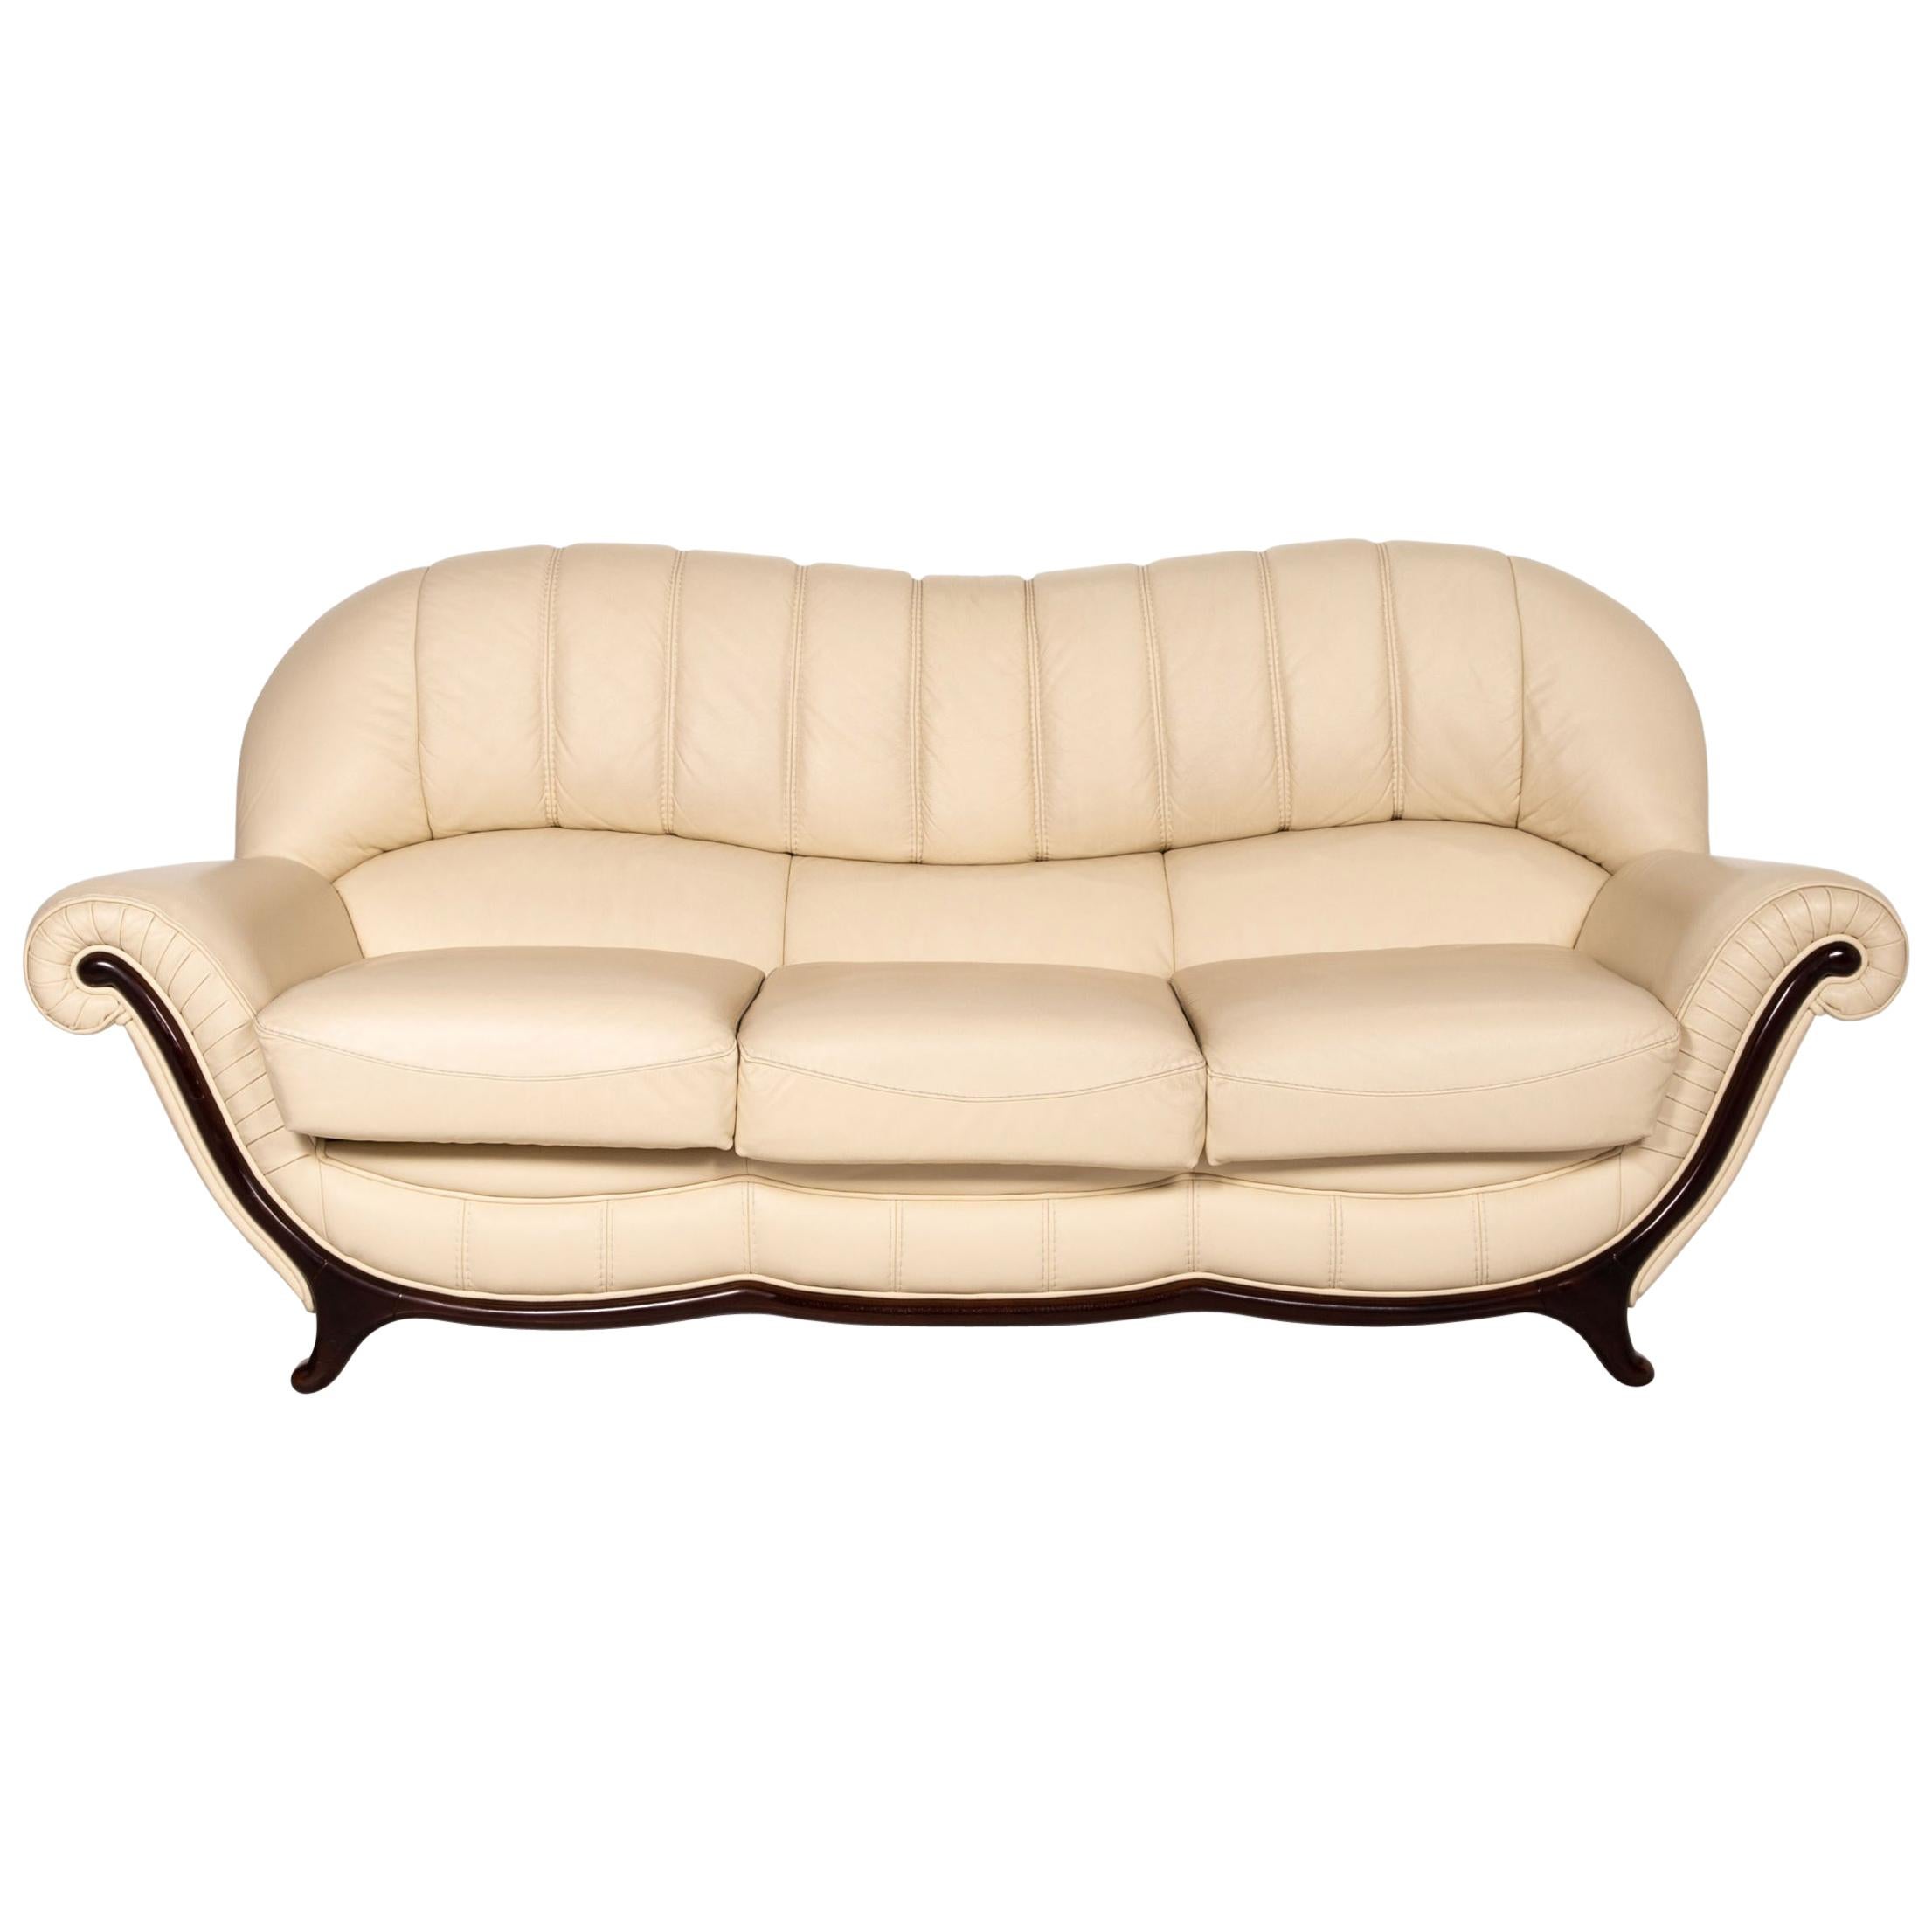 Nieri Leather Wood Sofa Cream Three-Seater Couch For Sale